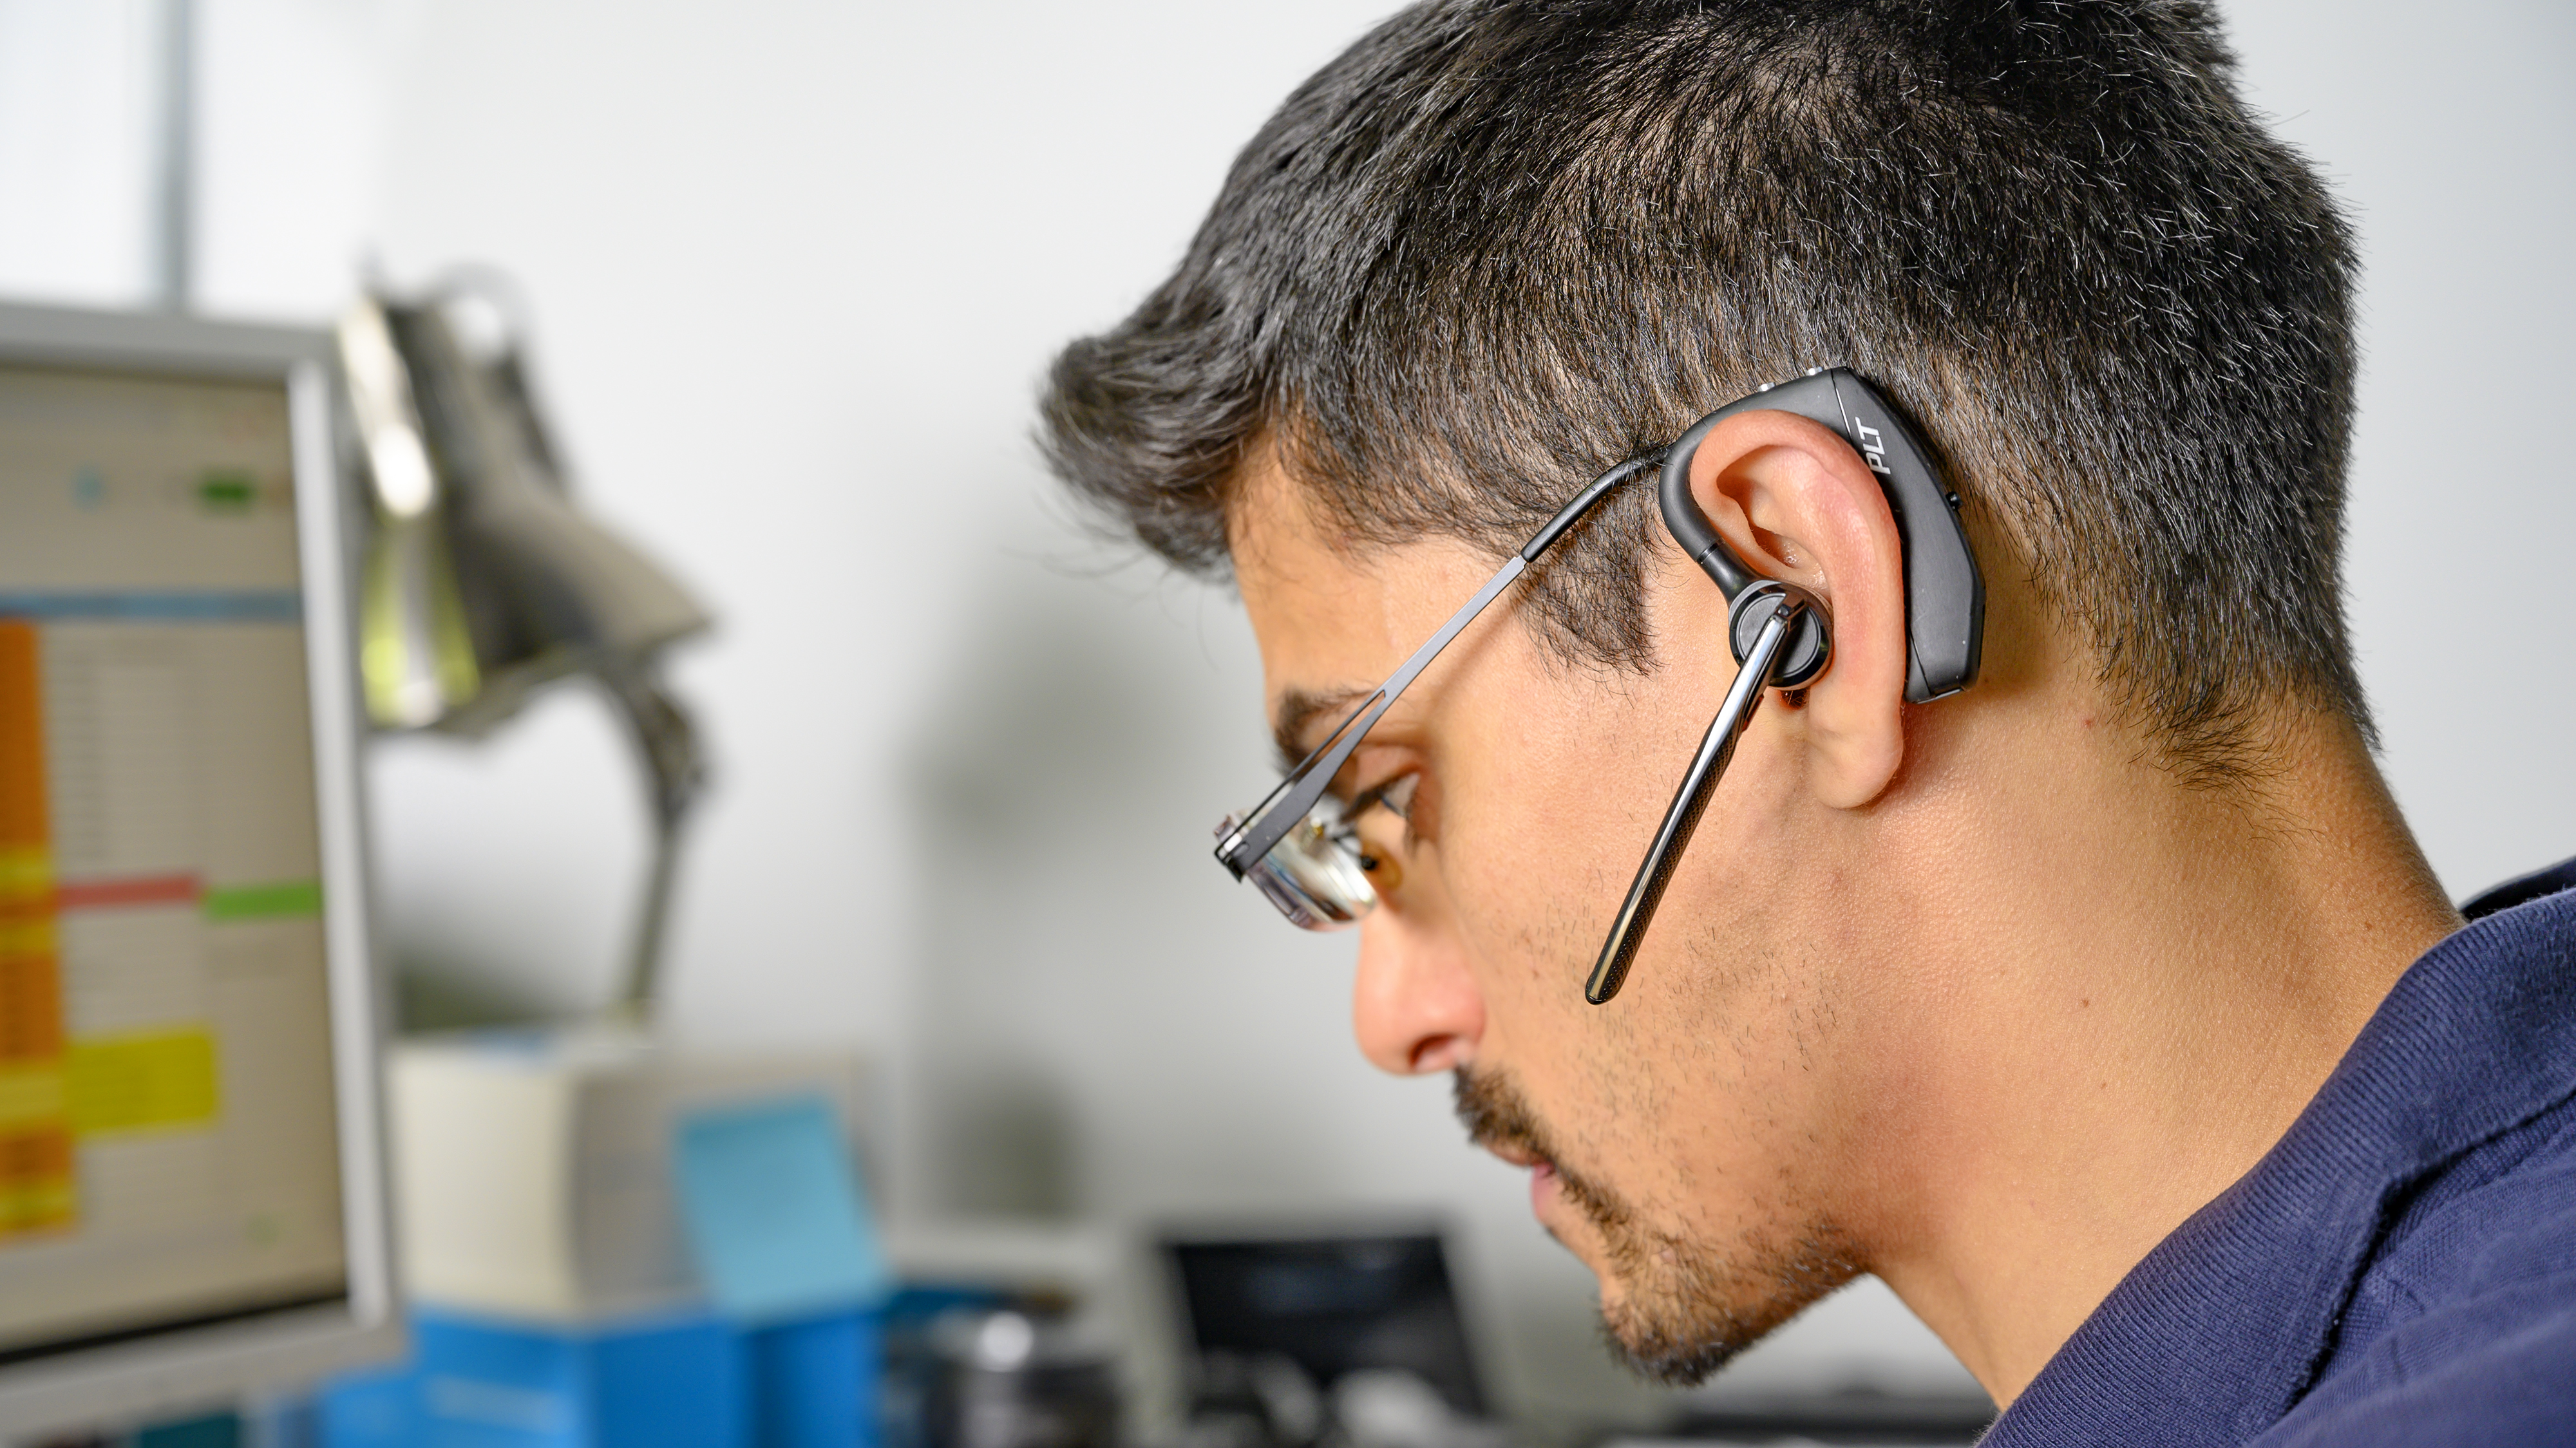 These are the best Bluetooth headsets available today.